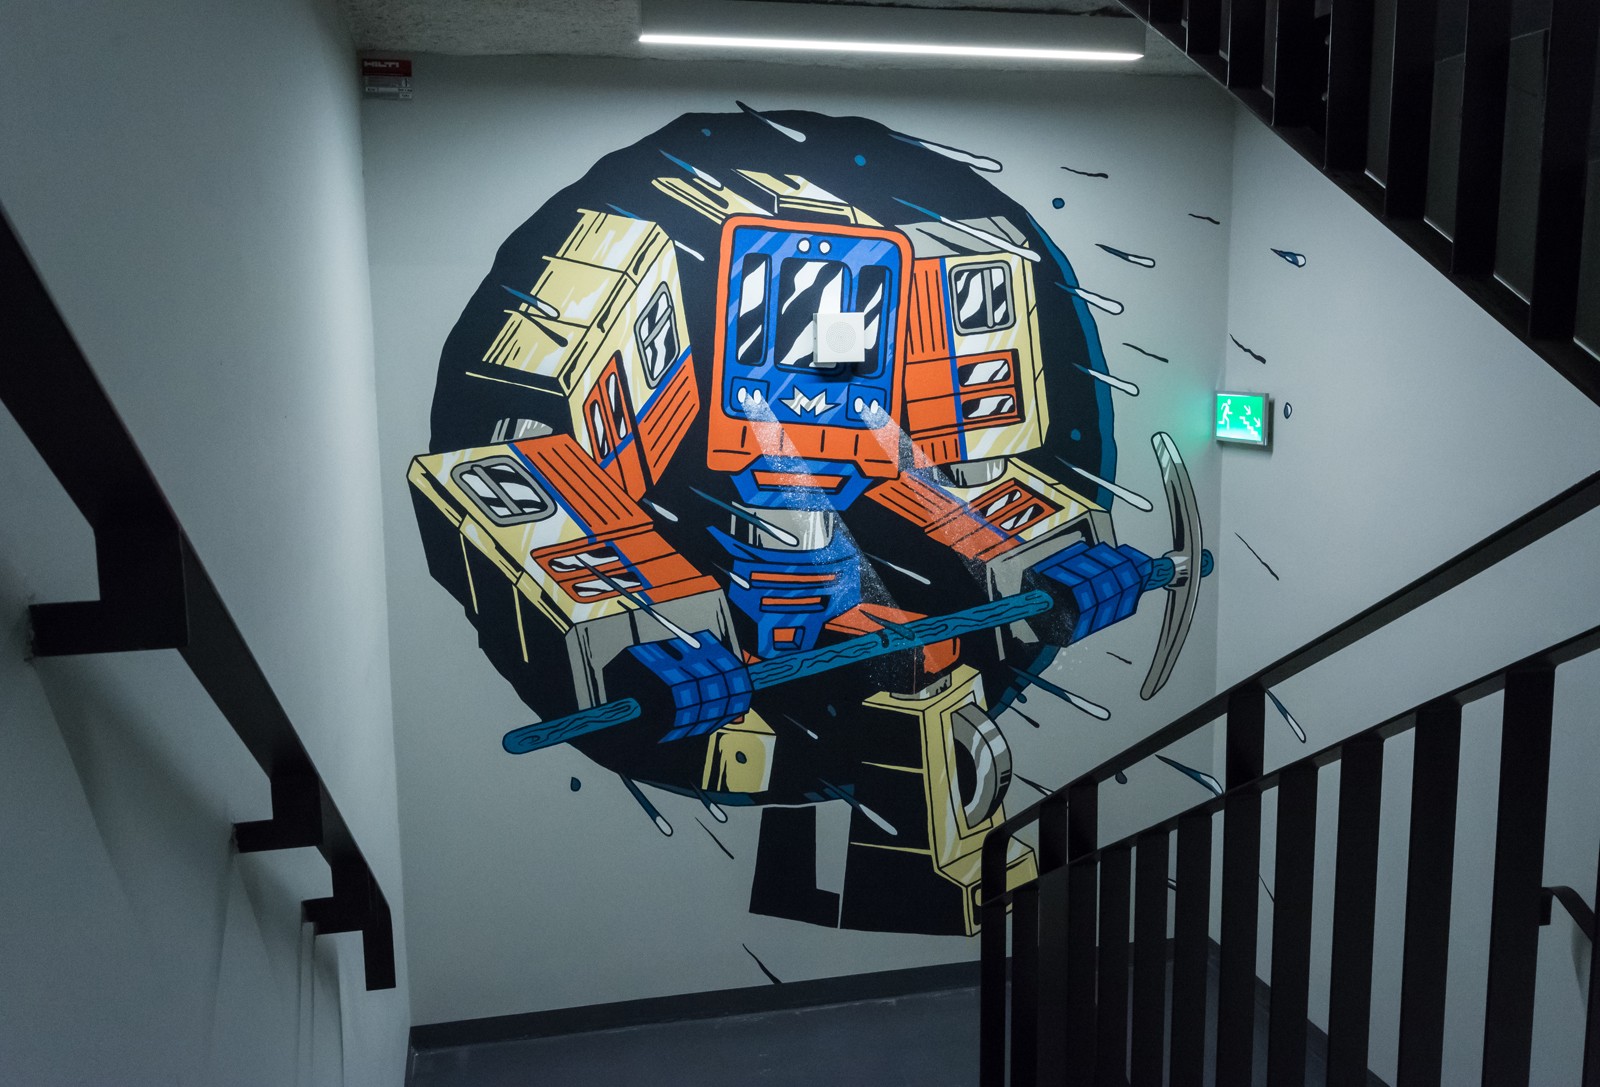 A project by a polish artist painted for Deloitte inside the Q22 building | Malowanie na zlecenie Deloitte | Portfolio